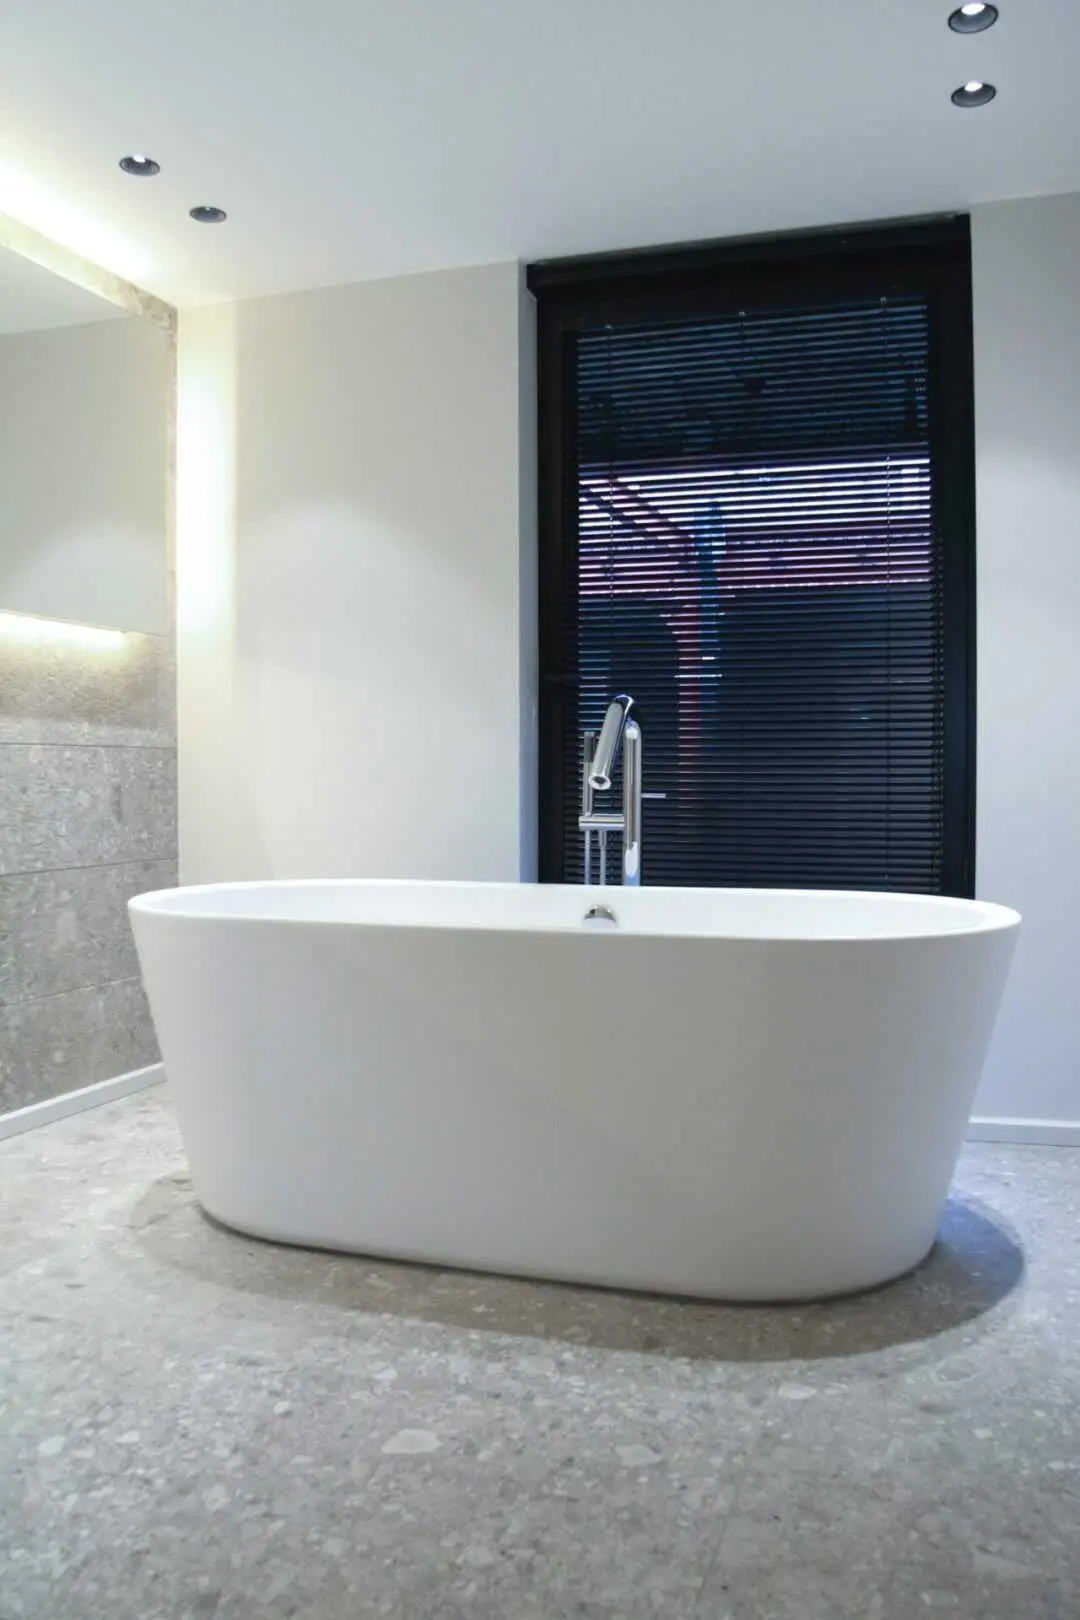 an image about Modern freestanding bathtub in a minimalist bathroom with gray tiles and natural lighting.